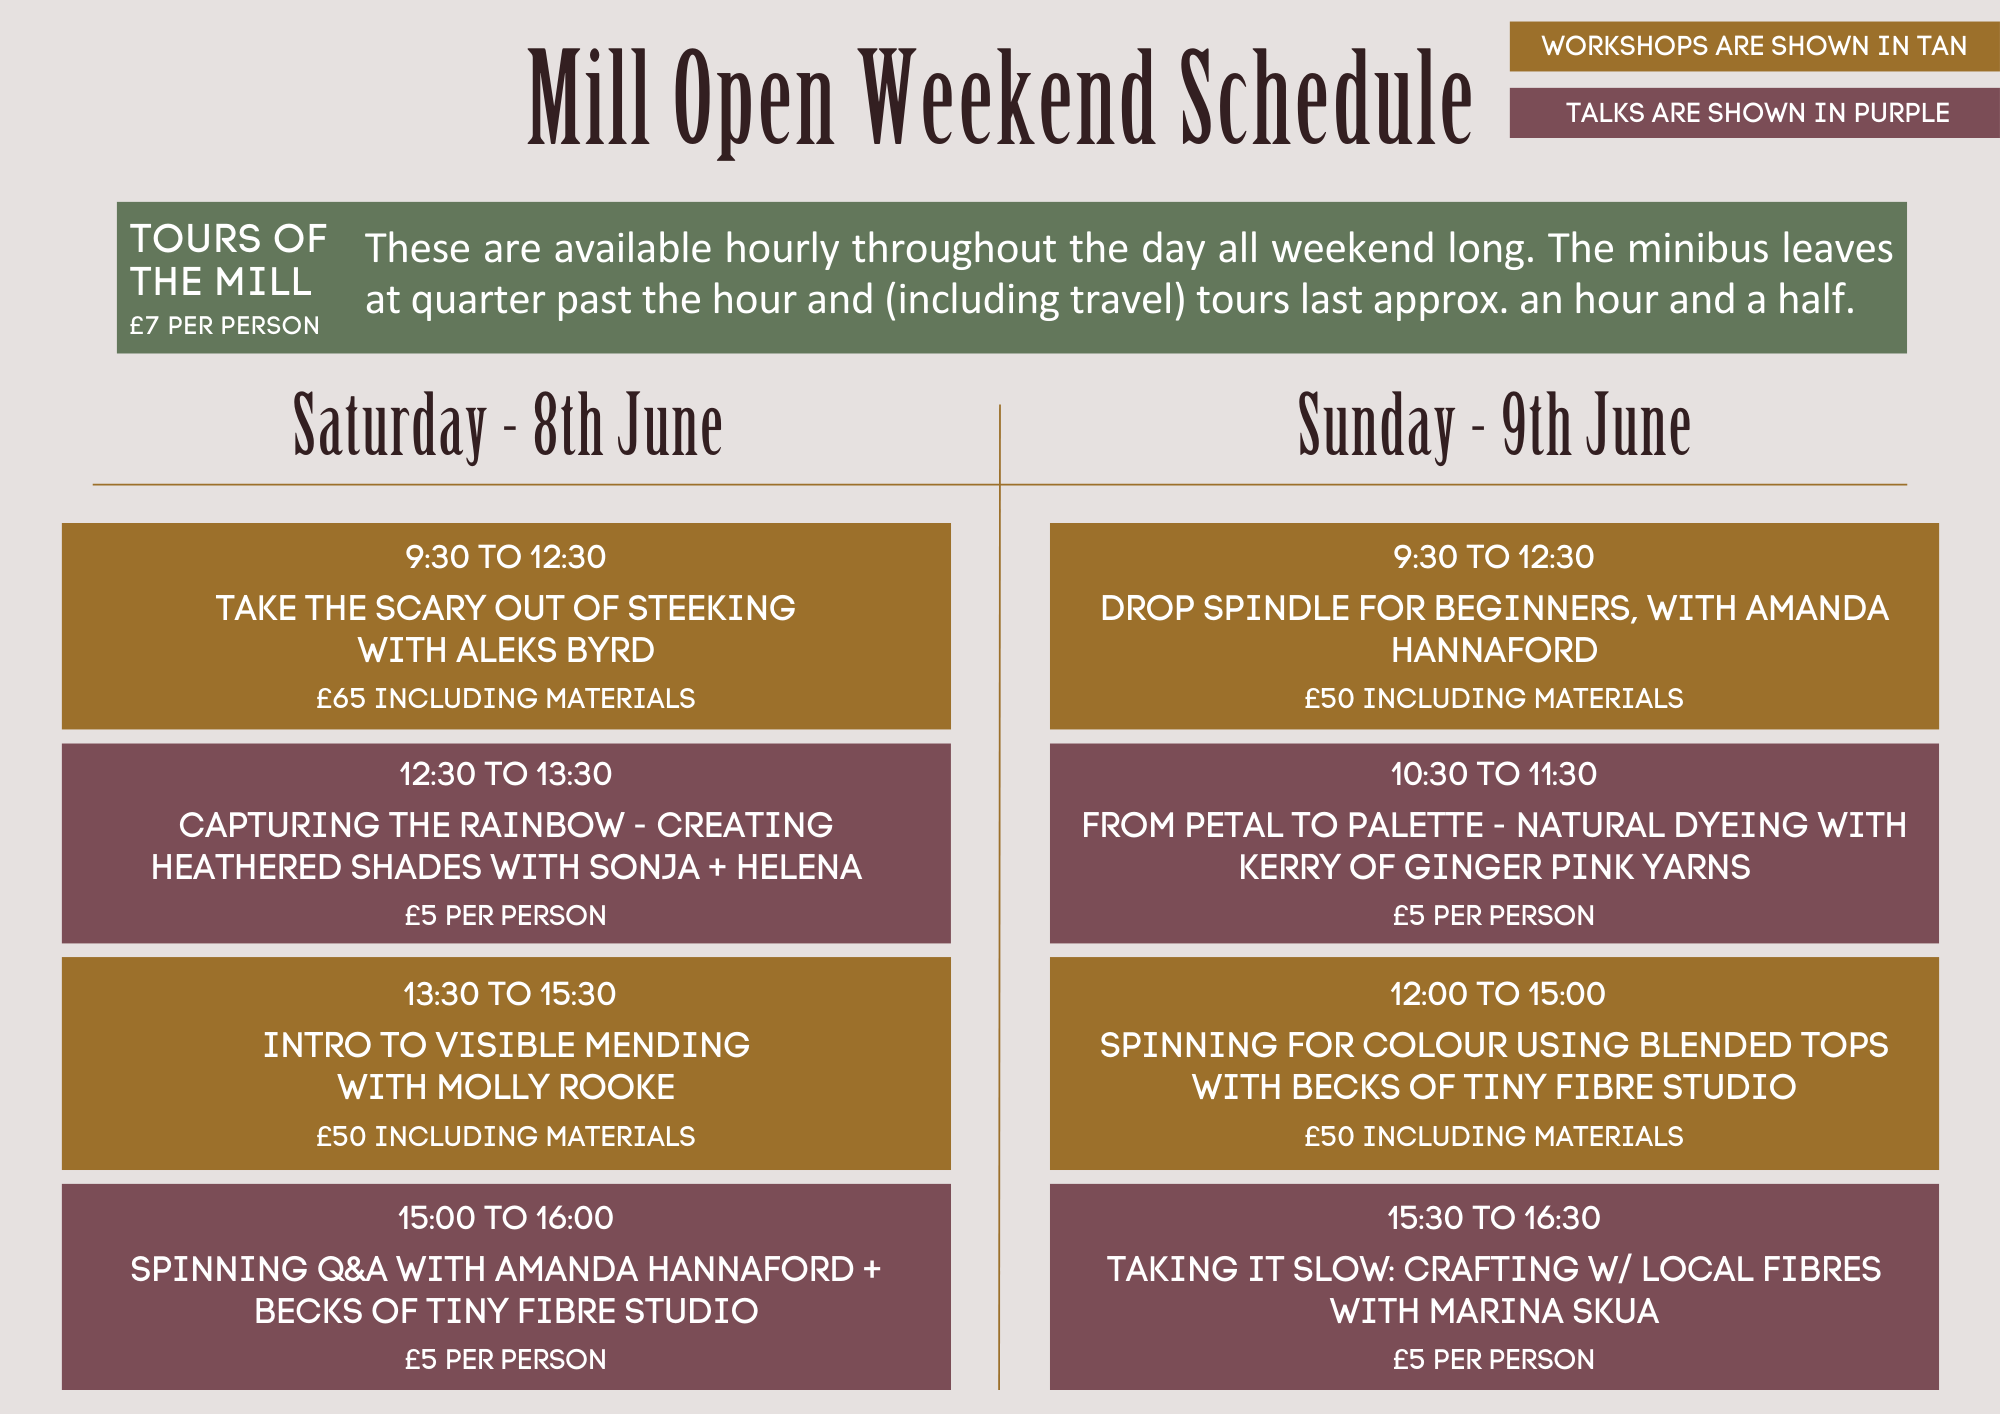 The weekend's schedule. Check the workshop and talks listings for details.